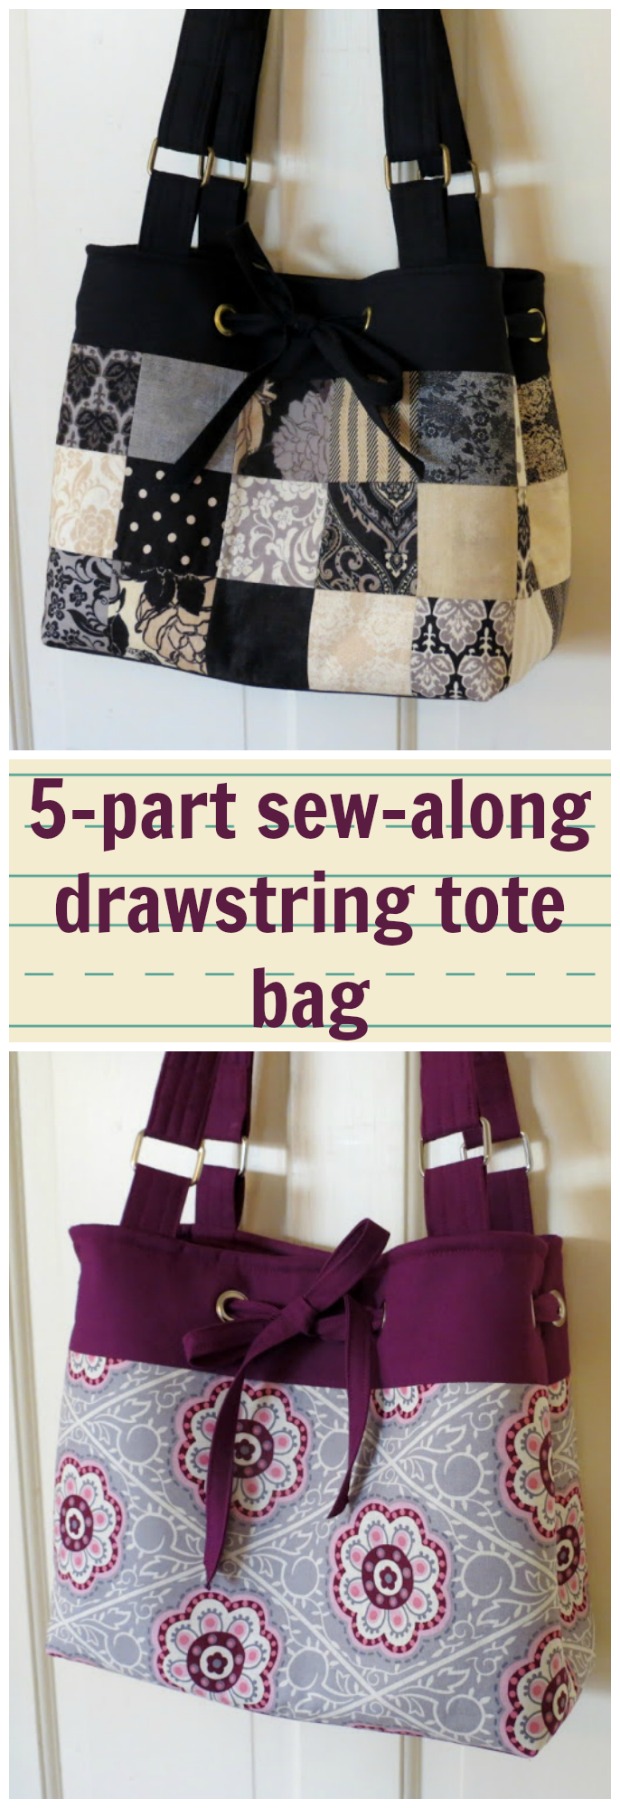 Full 5-part sew-along tutorial for how to make this drawstring purse. Can be made in patchwork too - instructions to that option as well. I learned lots of new bag skills and got a great bag at the end - great sew-along.